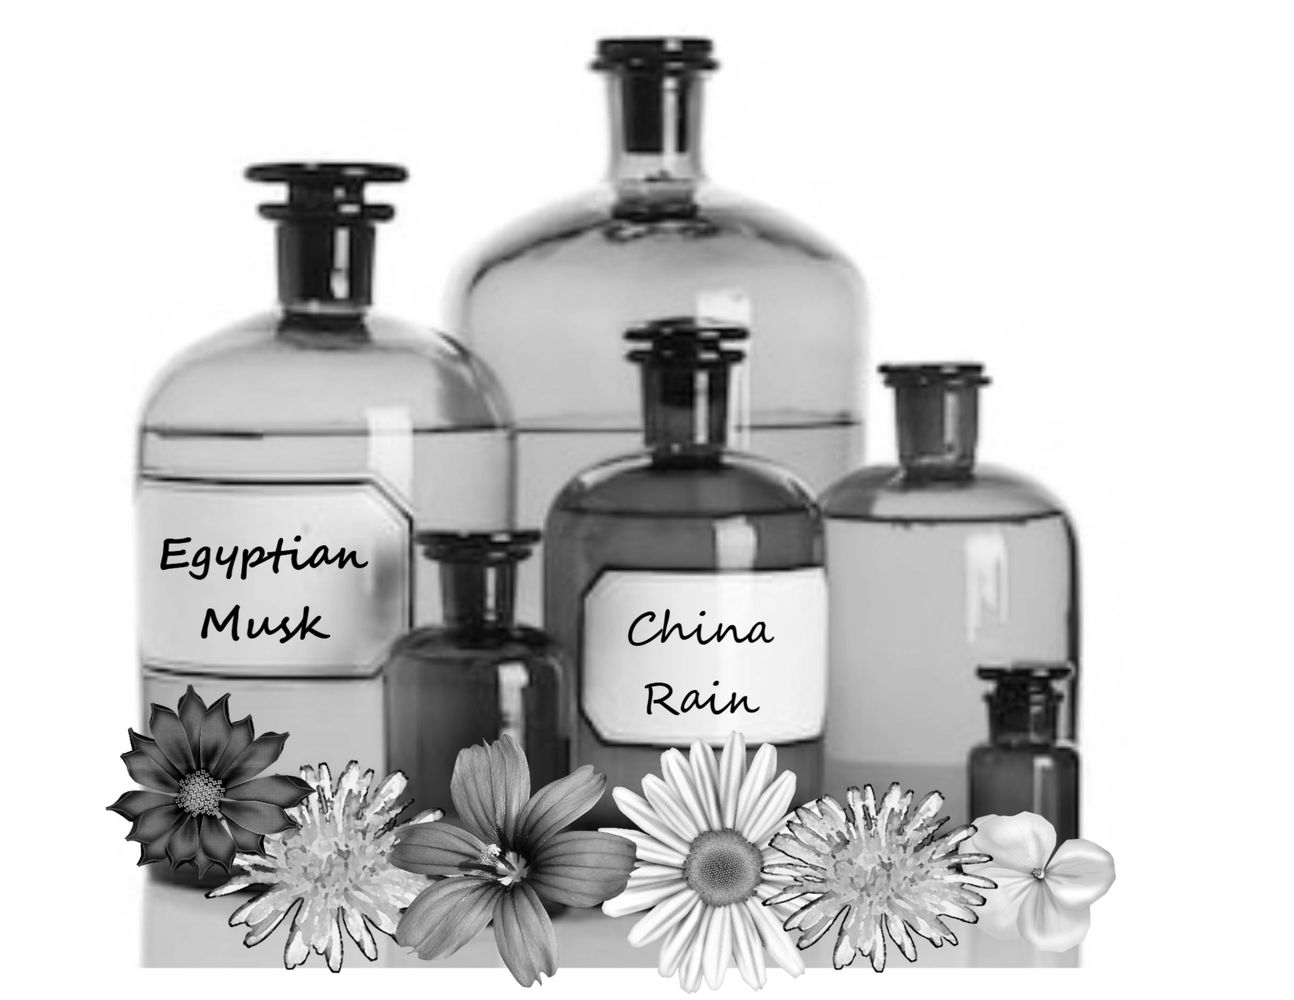 Common Scents has been selling pure, superior perfume oils and  body care products since 1976. Forma